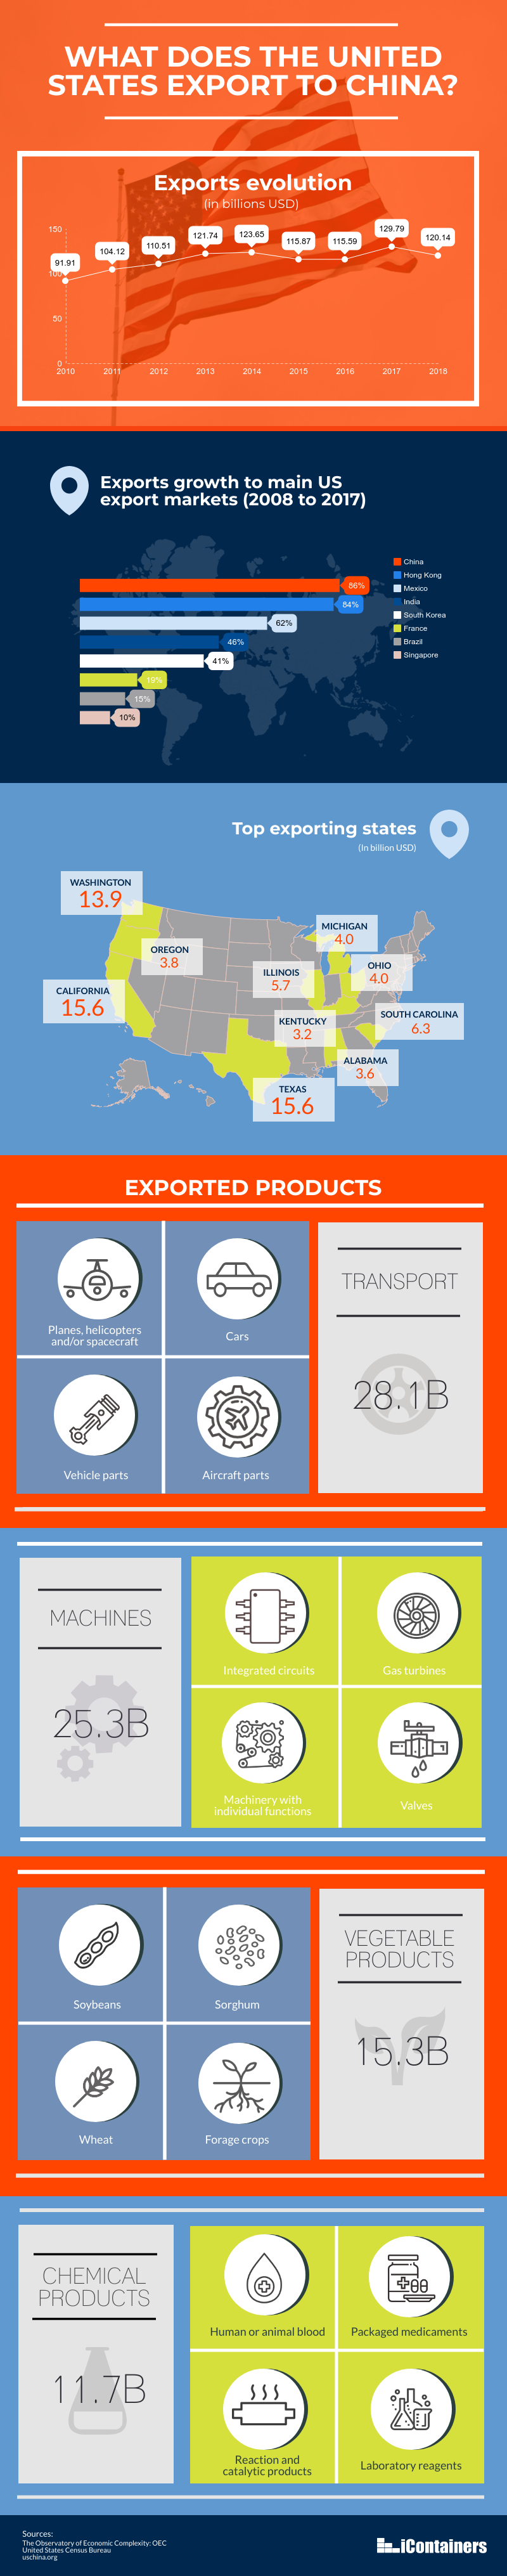 US exports to China infographic by iContainers